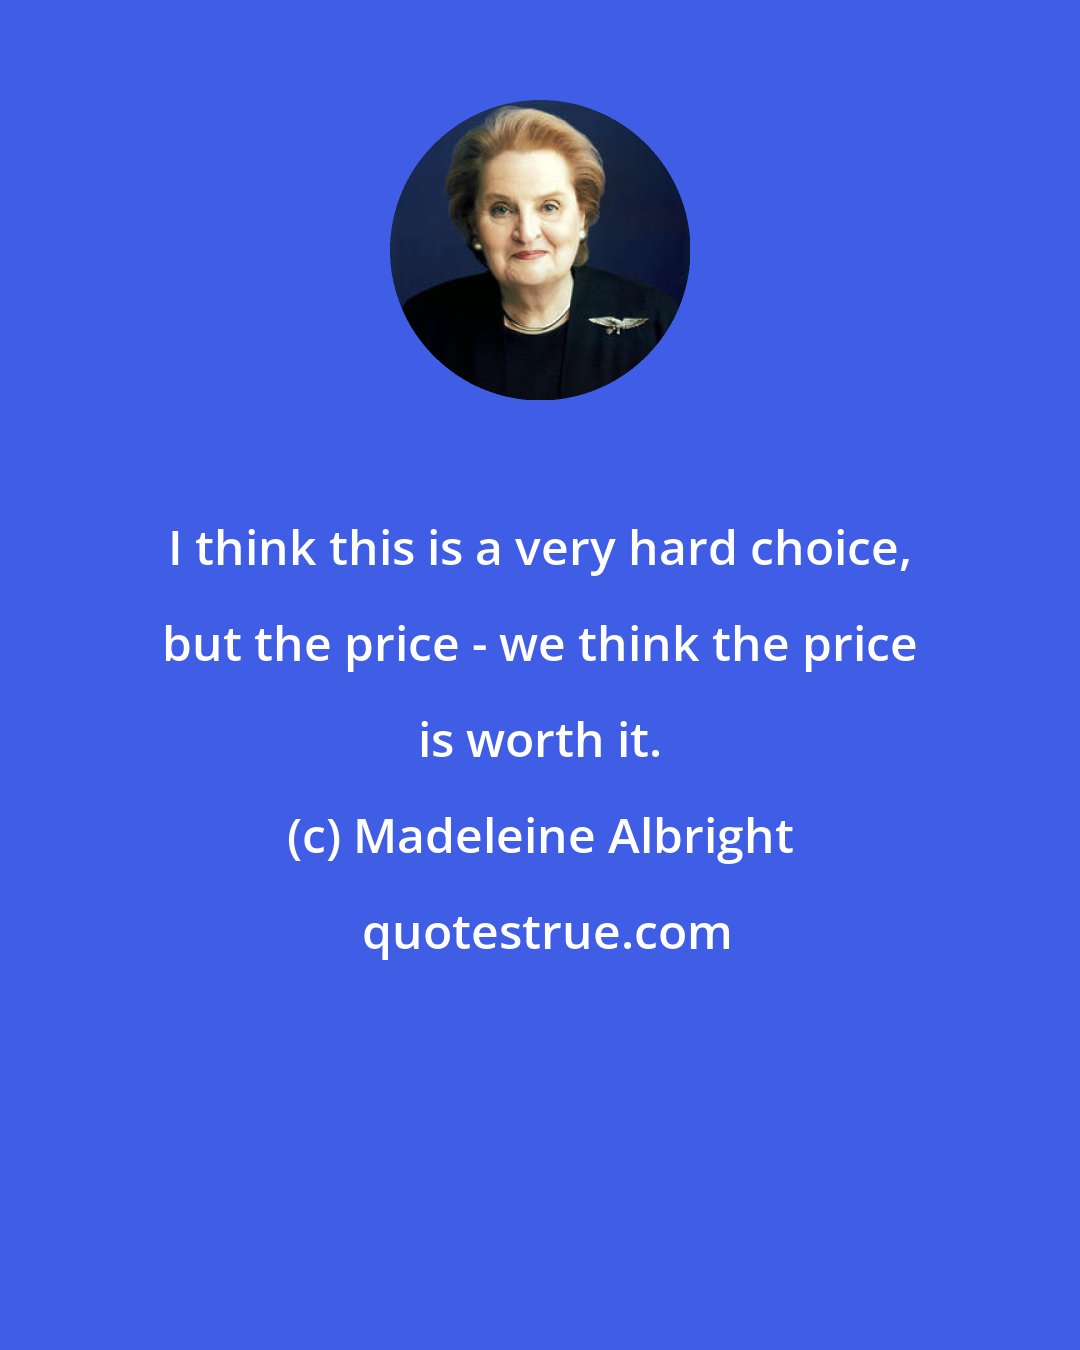 Madeleine Albright: I think this is a very hard choice, but the price - we think the price is worth it.